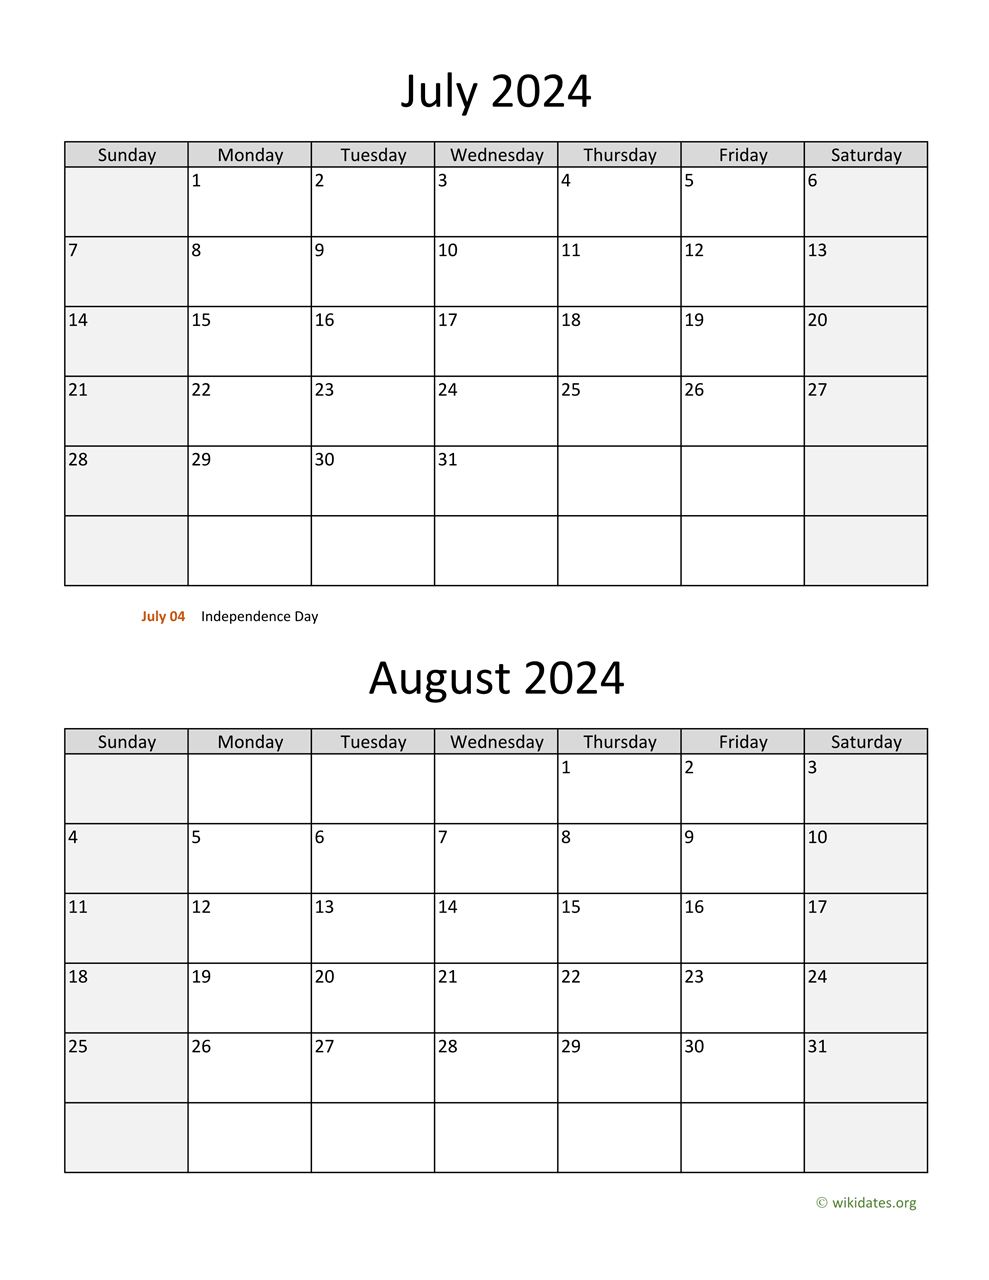 July And August 2024 Calendar | Wikidates for Calendar June July August 2024 Printable